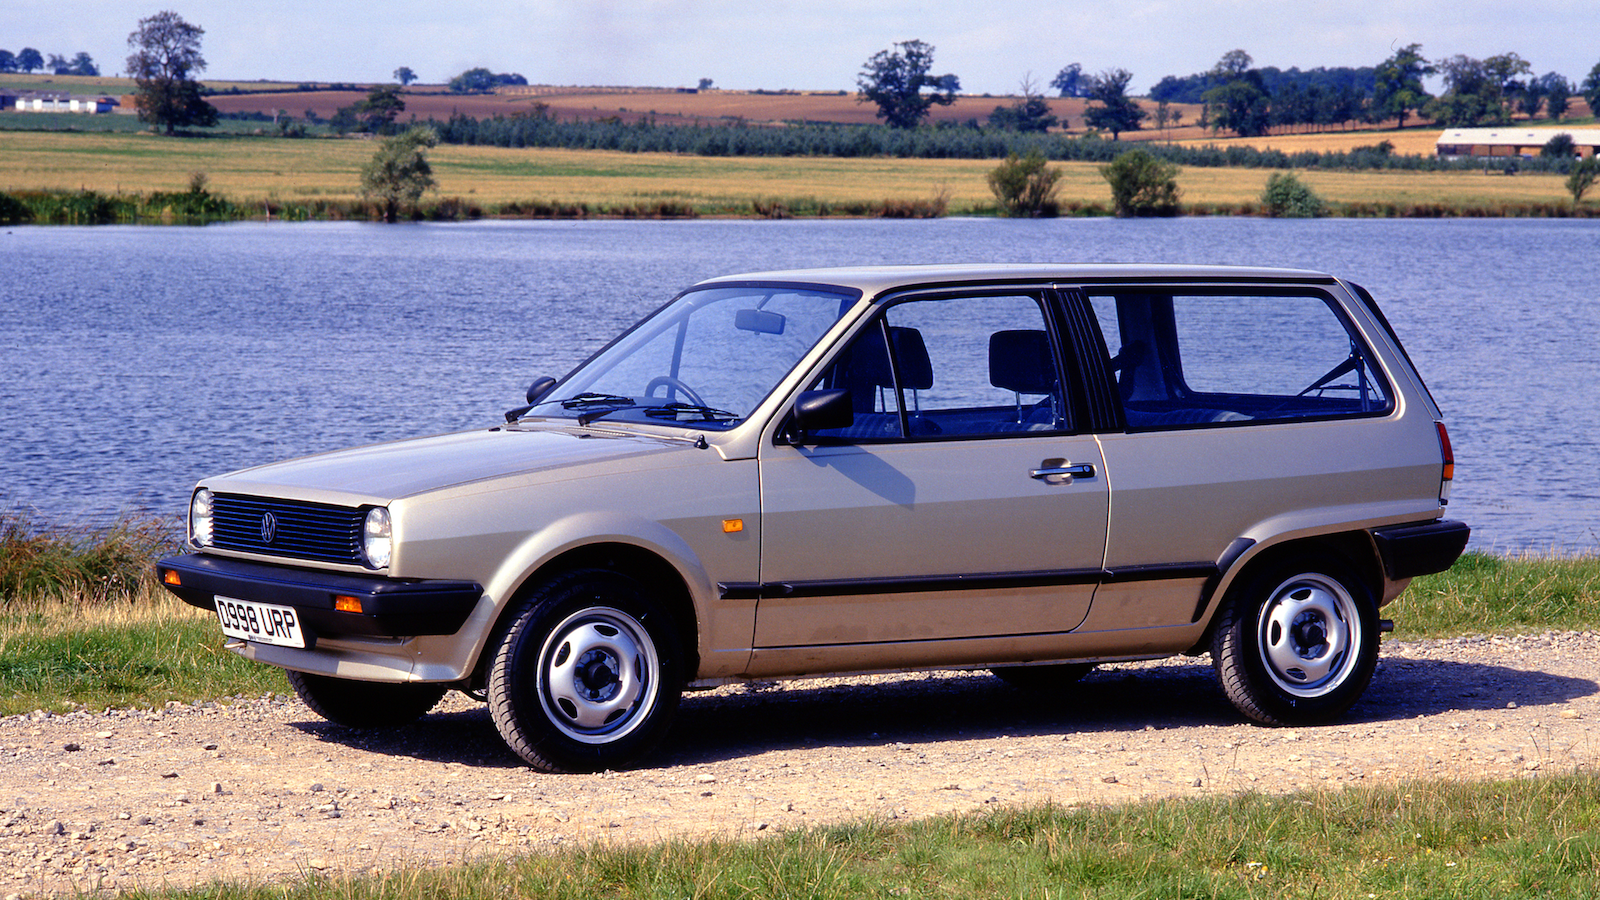 19 classics that don’t need an MOT in 2021